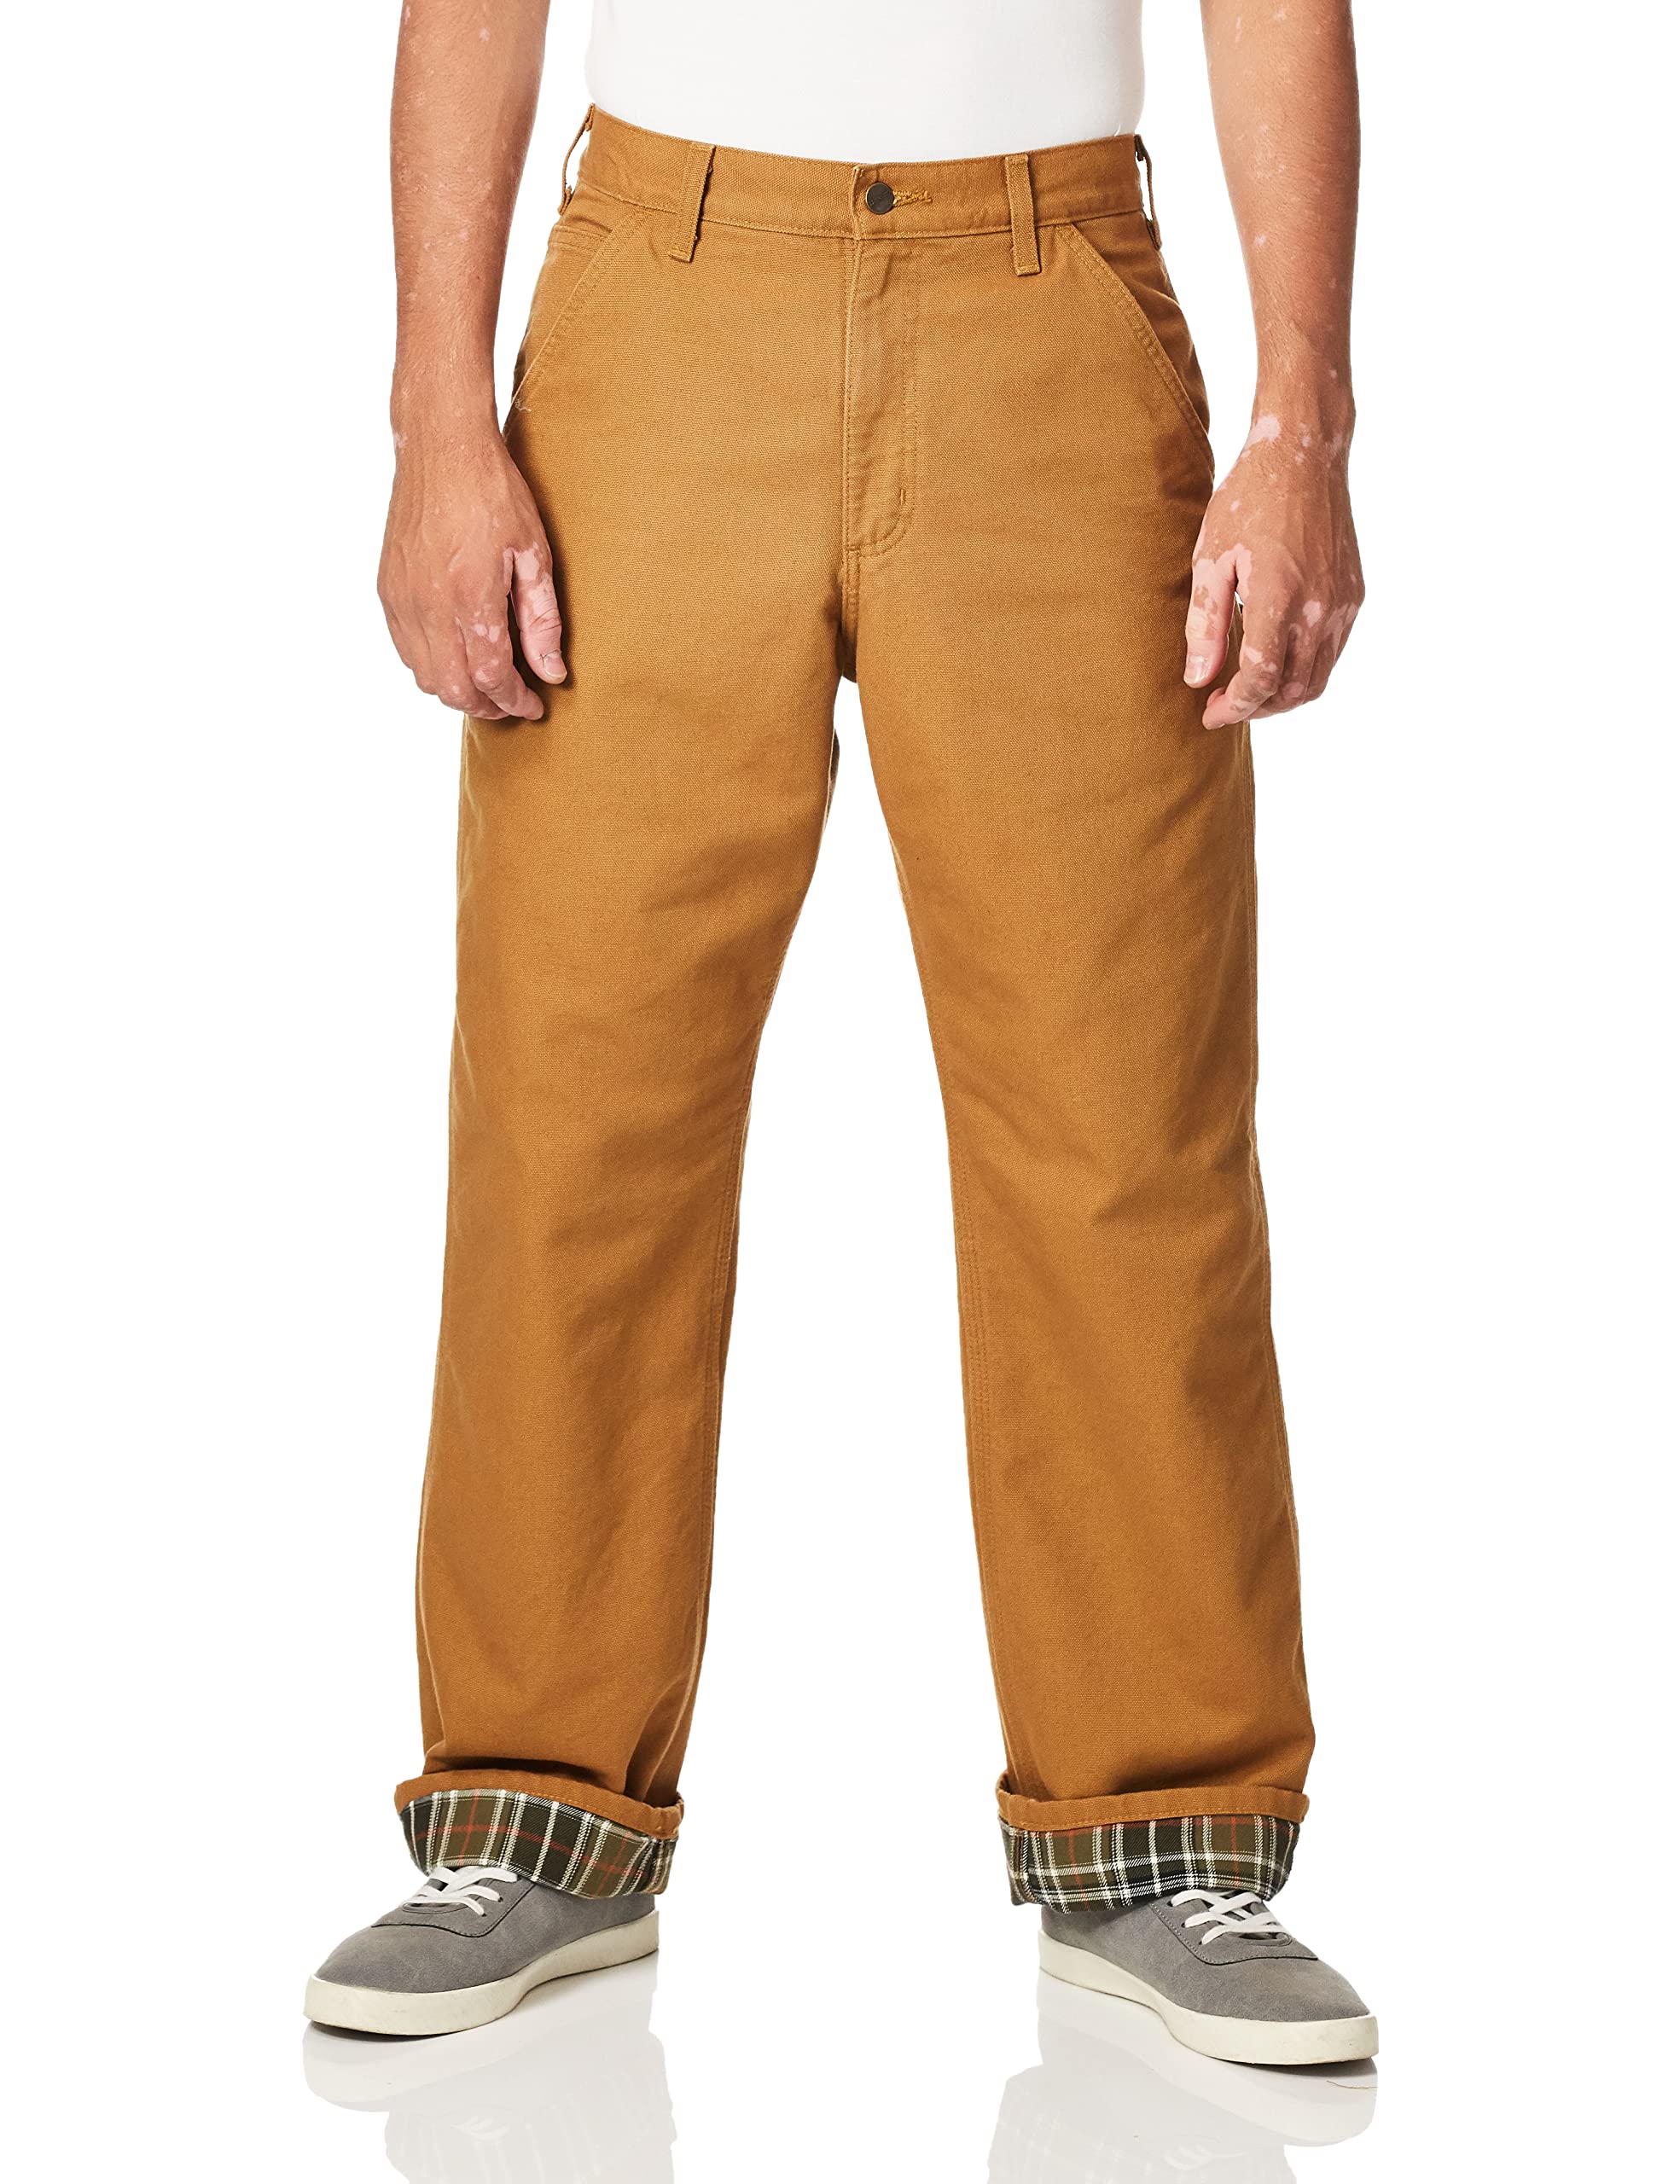 Carhartt Men's Loose Fit Washed Duck Flannel-Lined Utility Work Pant